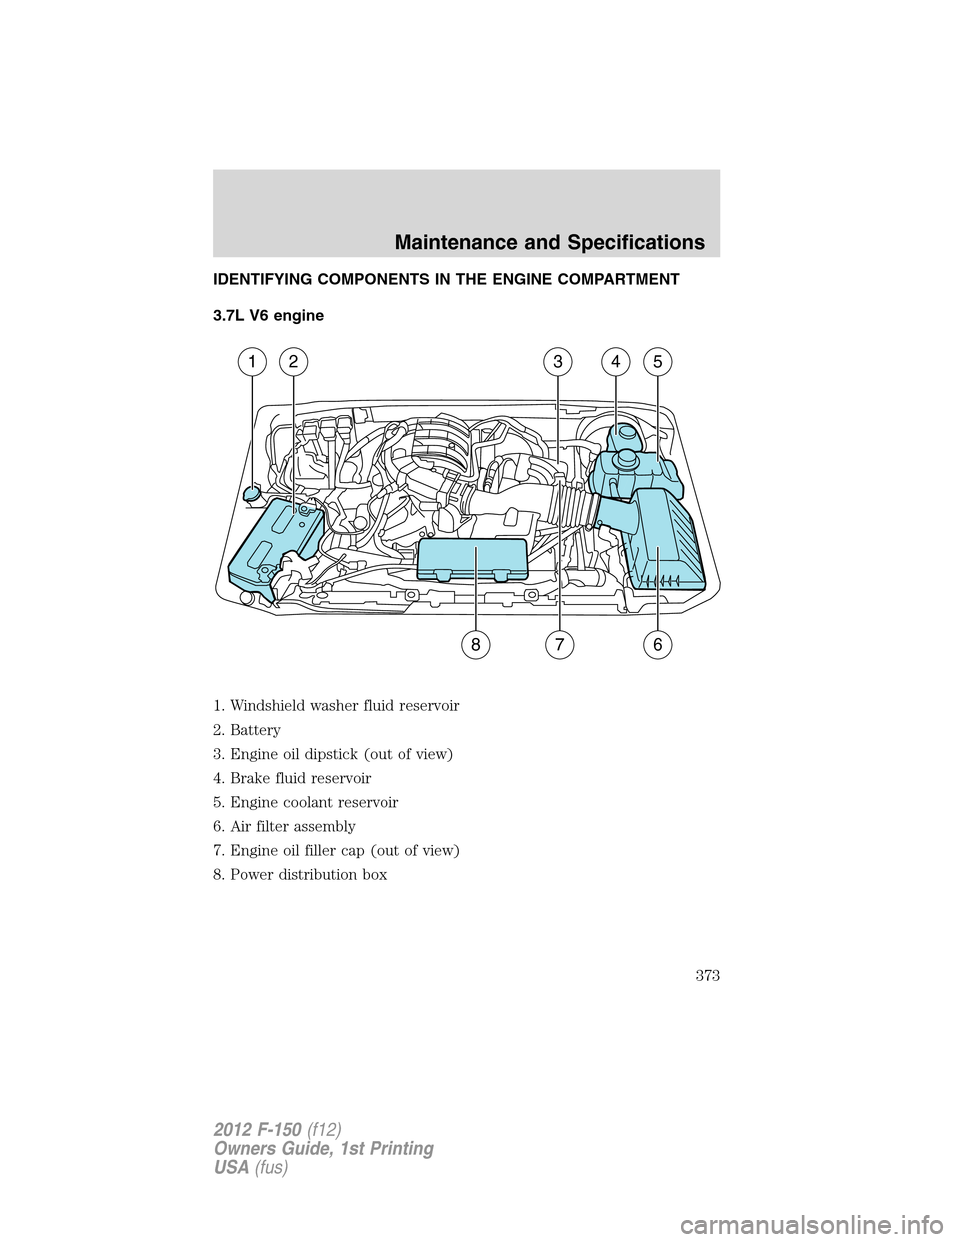 FORD F150 2012 12.G Owners Manual IDENTIFYING COMPONENTS IN THE ENGINE COMPARTMENT
3.7L V6 engine
1. Windshield washer fluid reservoir
2. Battery
3. Engine oil dipstick (out of view)
4. Brake fluid reservoir
5. Engine coolant reservoi